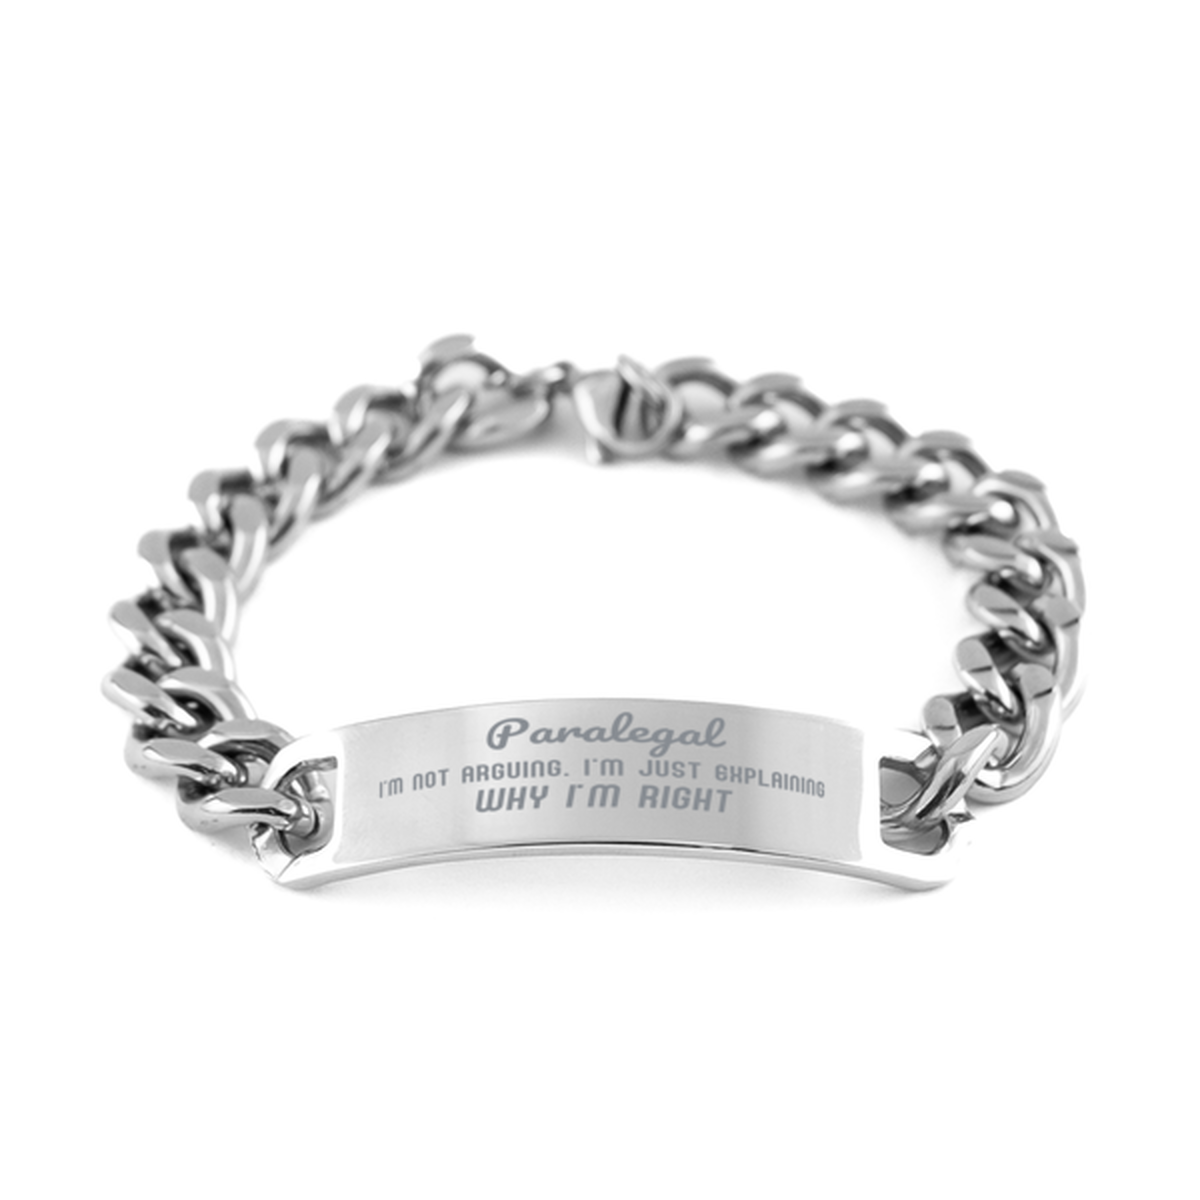 Paralegal I'm not Arguing. I'm Just Explaining Why I'm RIGHT Cuban Chain Stainless Steel Bracelet, Graduation Birthday Christmas Paralegal Gifts For Paralegal Funny Saying Quote Present for Men Women Coworker